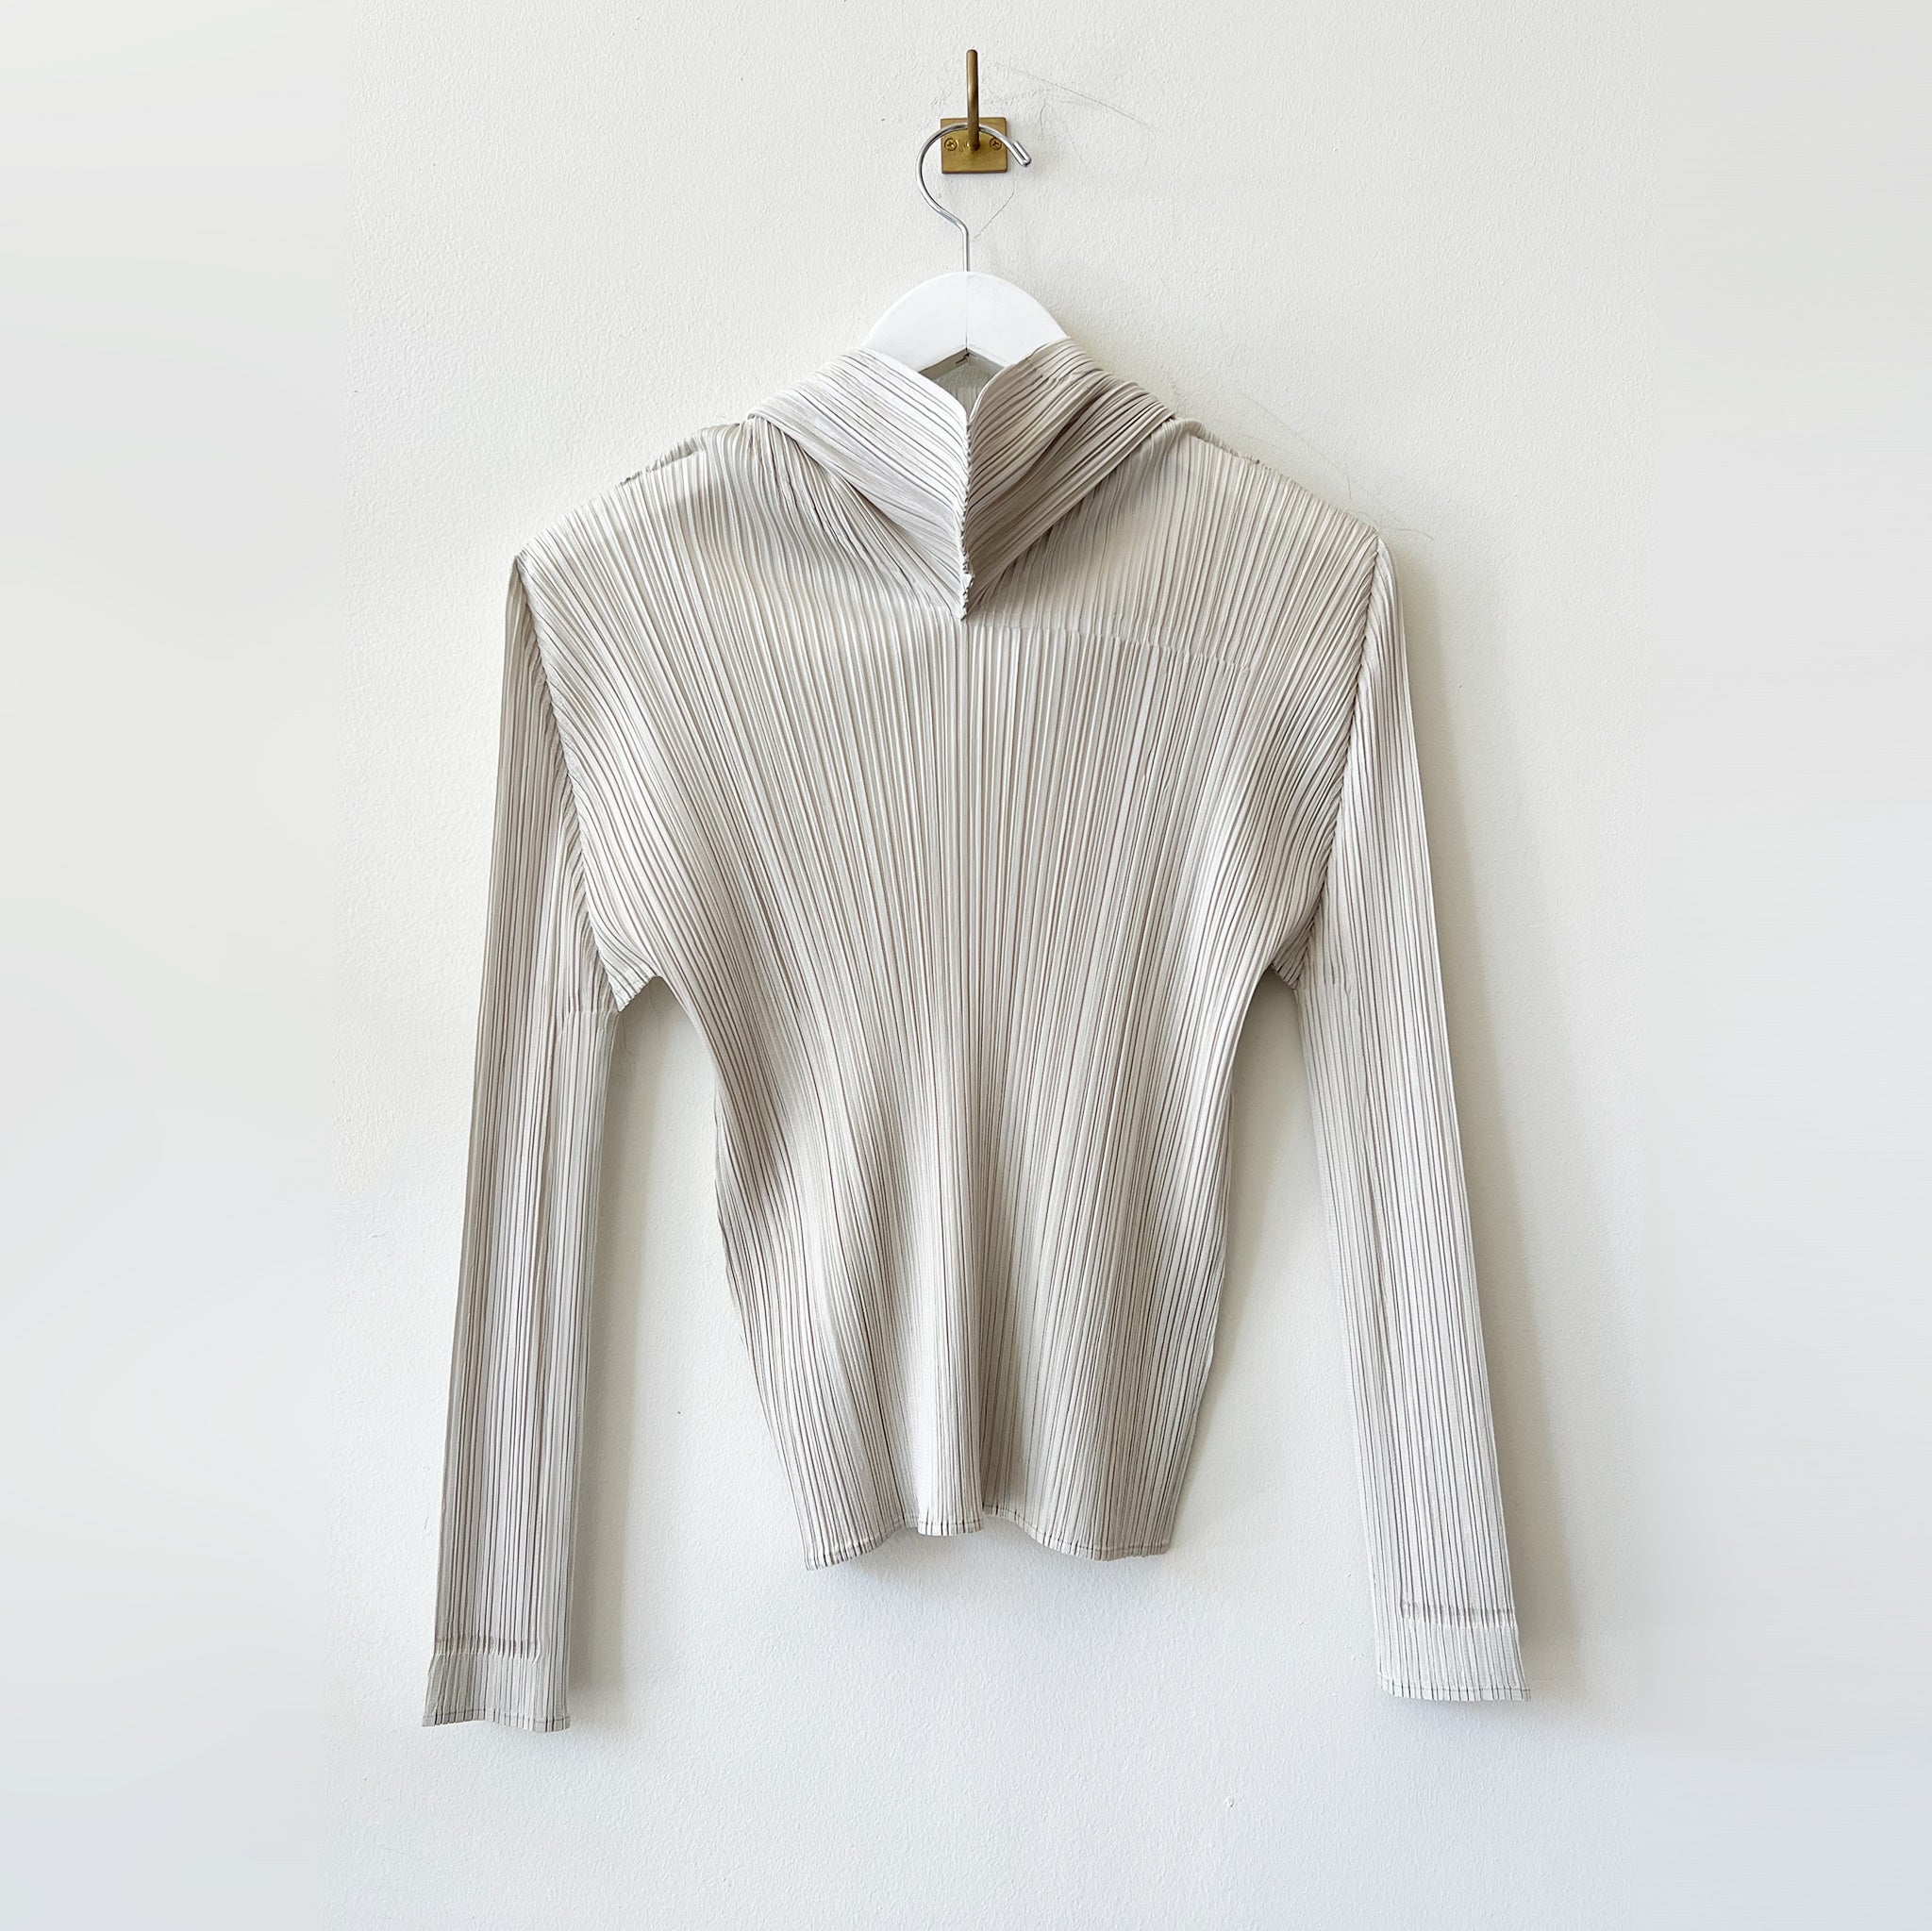 Fitted pleated light grey hoodie with an exaggerated cowl neckline.